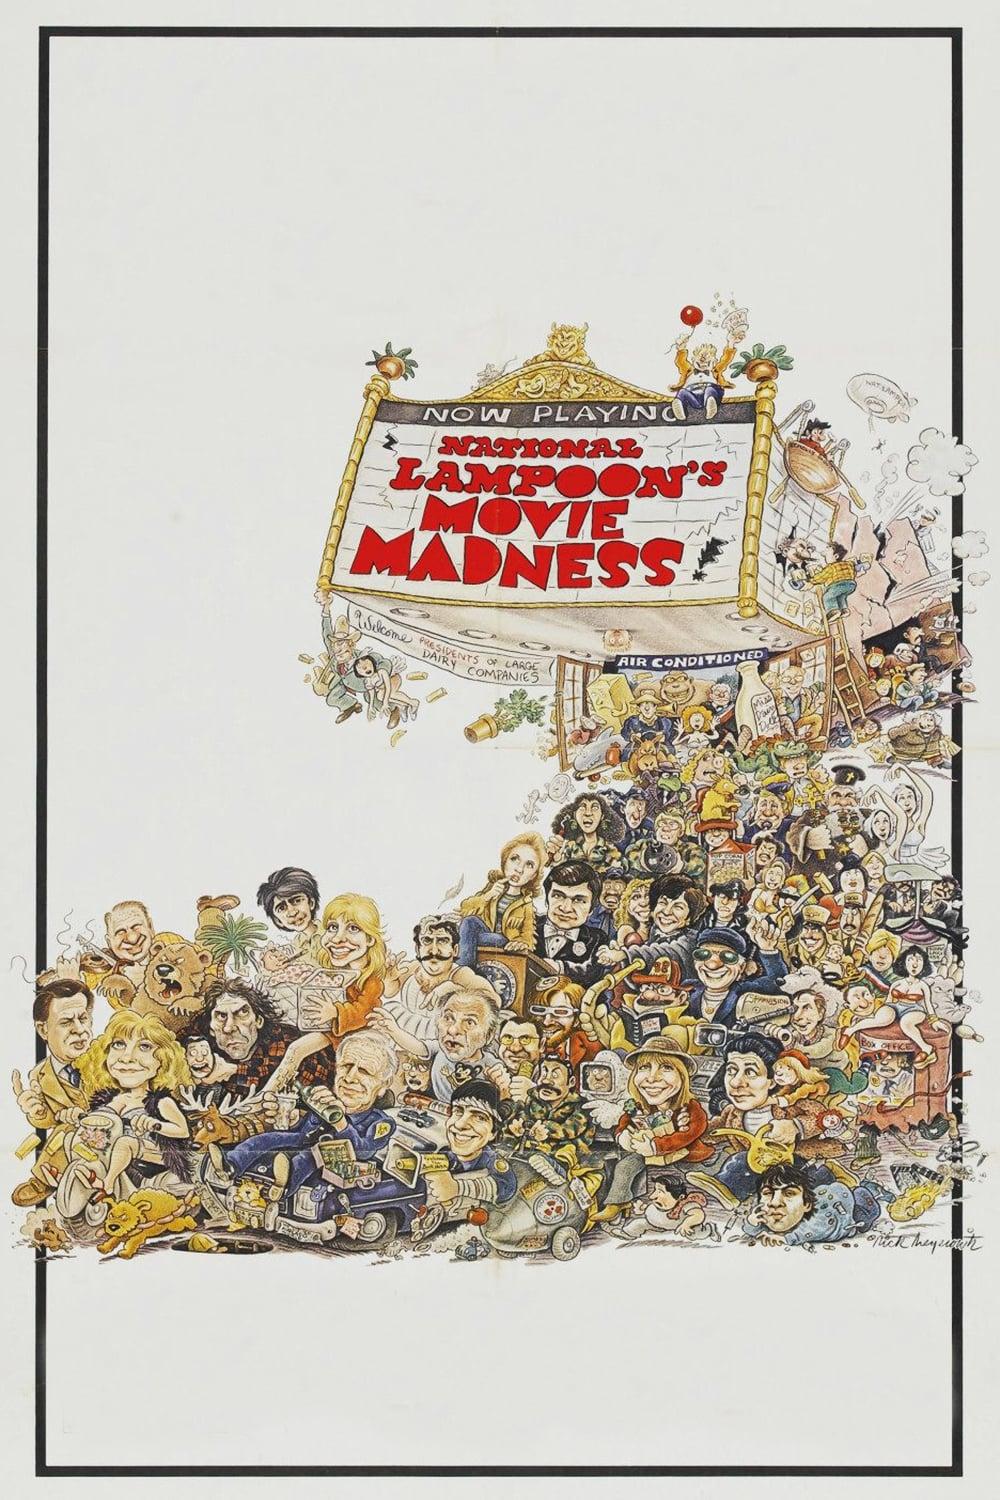 National Lampoon's Movie Madness poster